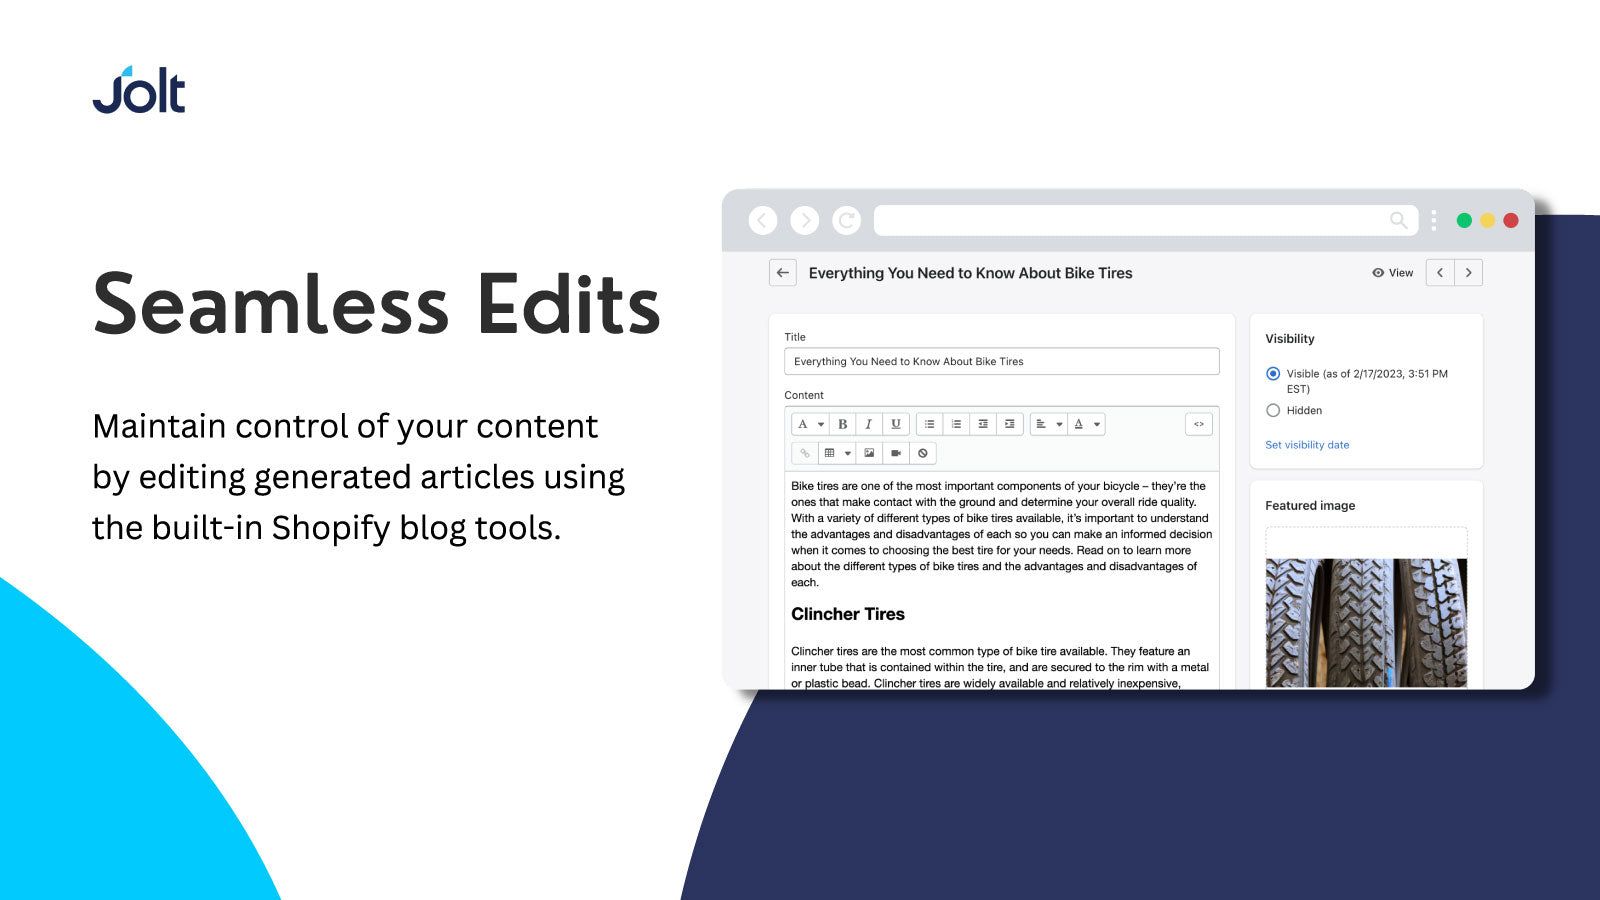 Edit posts using the built-in shopify blog editor